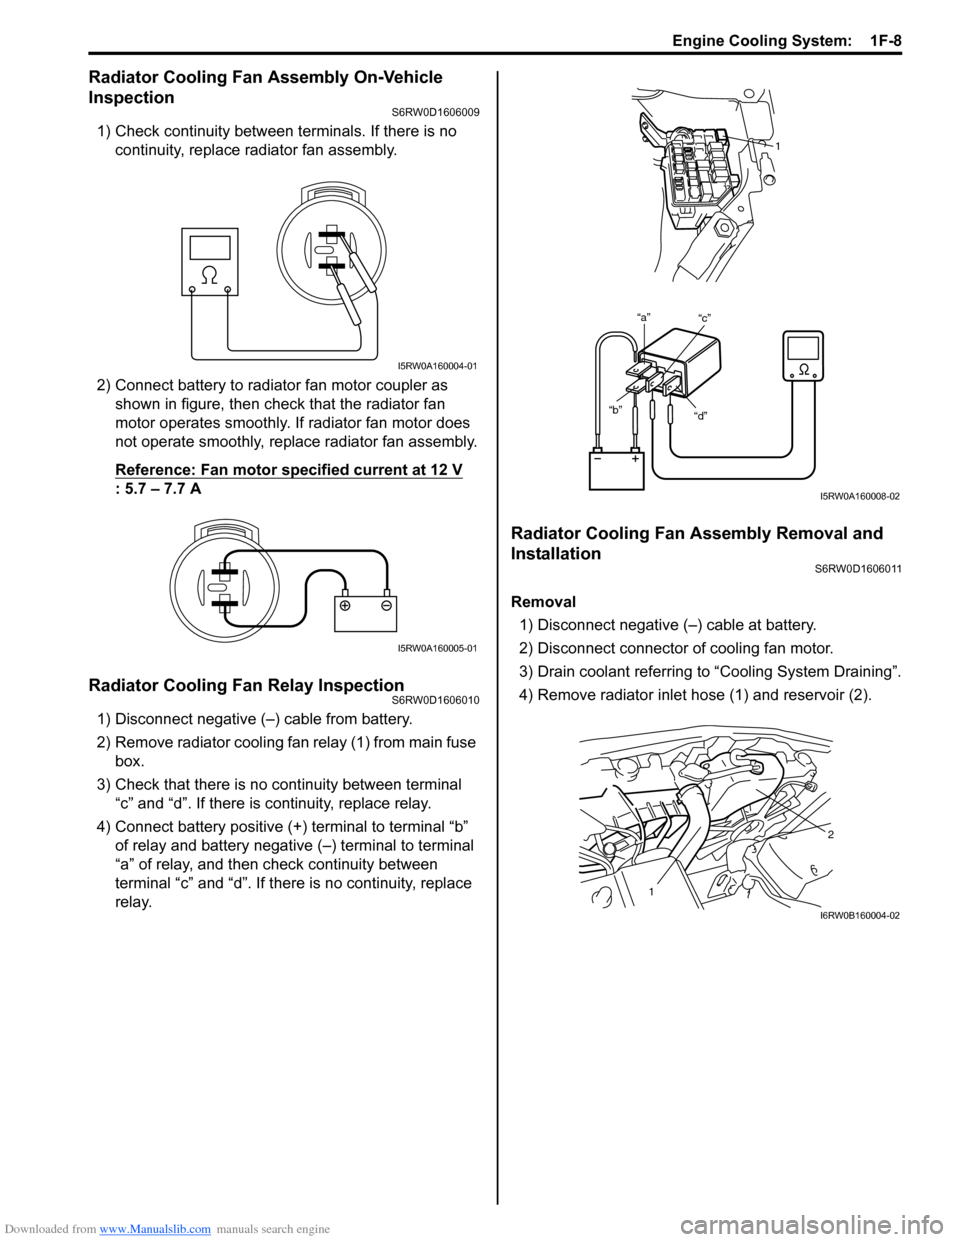 SUZUKI SX4 2006 1.G Service Owners Guide Downloaded from www.Manualslib.com manuals search engine Engine Cooling System:  1F-8
Radiator Cooling Fan Assembly On-Vehicle 
Inspection
S6RW0D1606009
1) Check continuity between terminals. If there